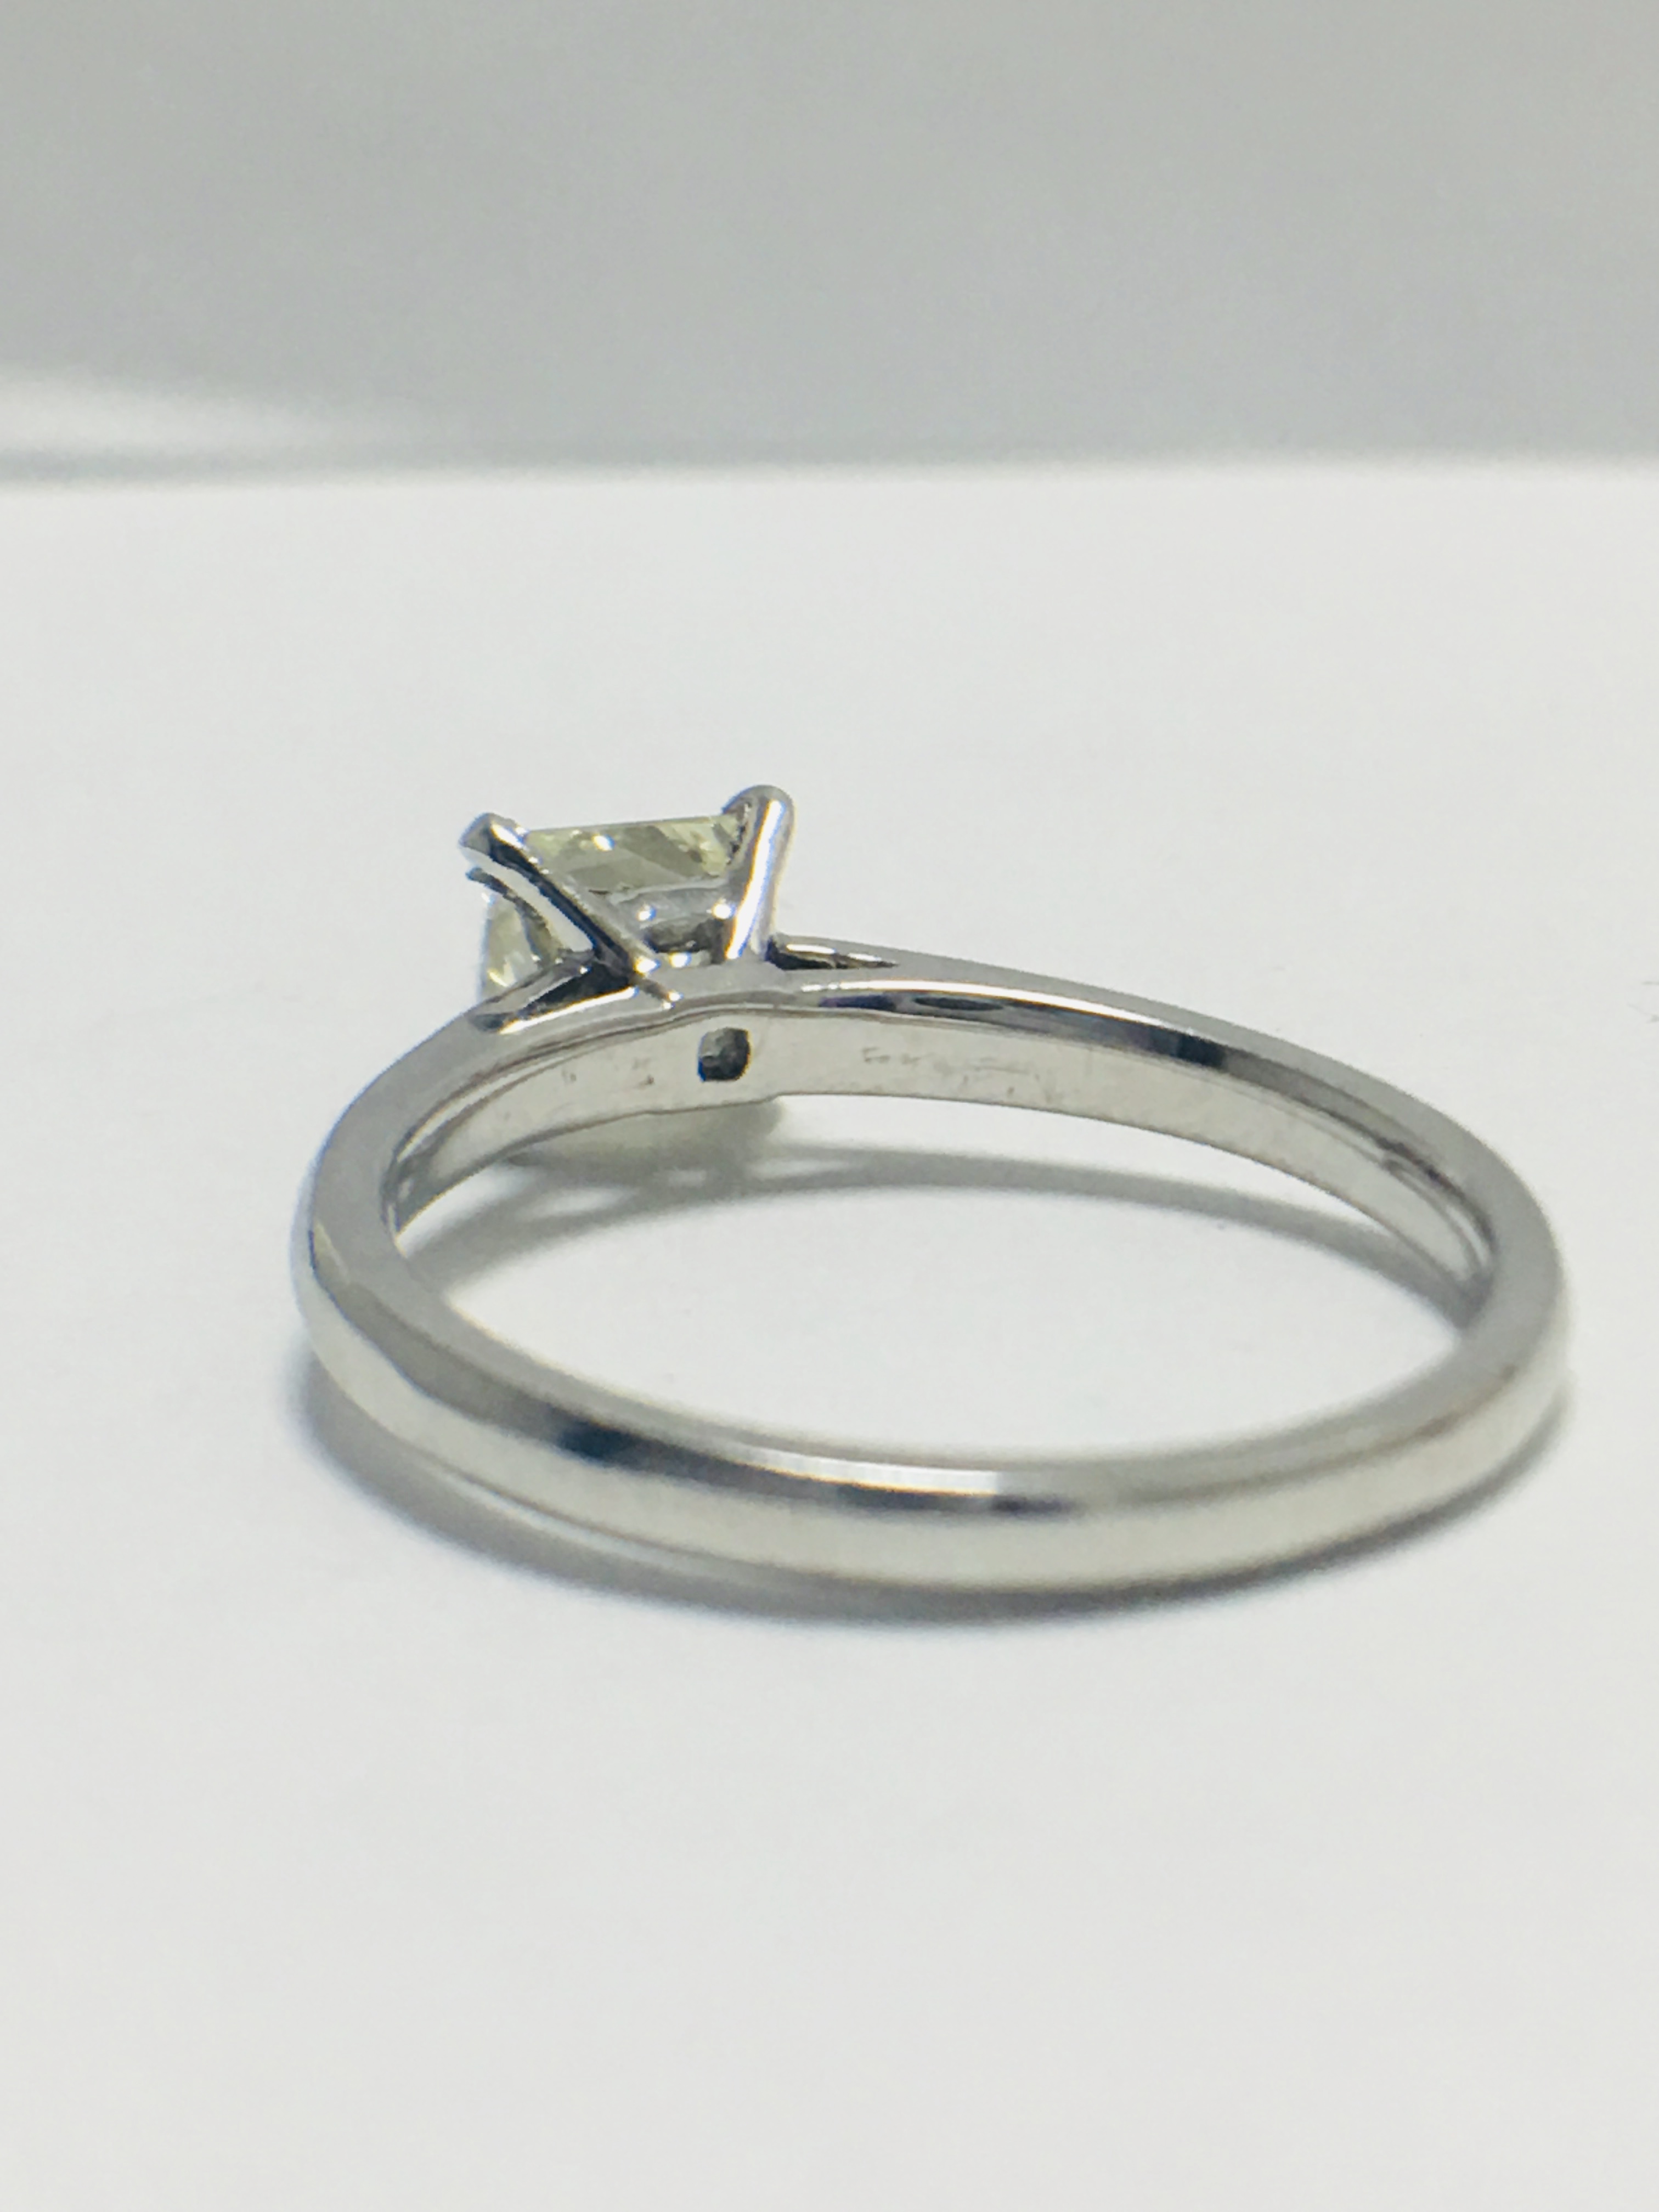 1ct princess cut solitaire ring - Image 3 of 6